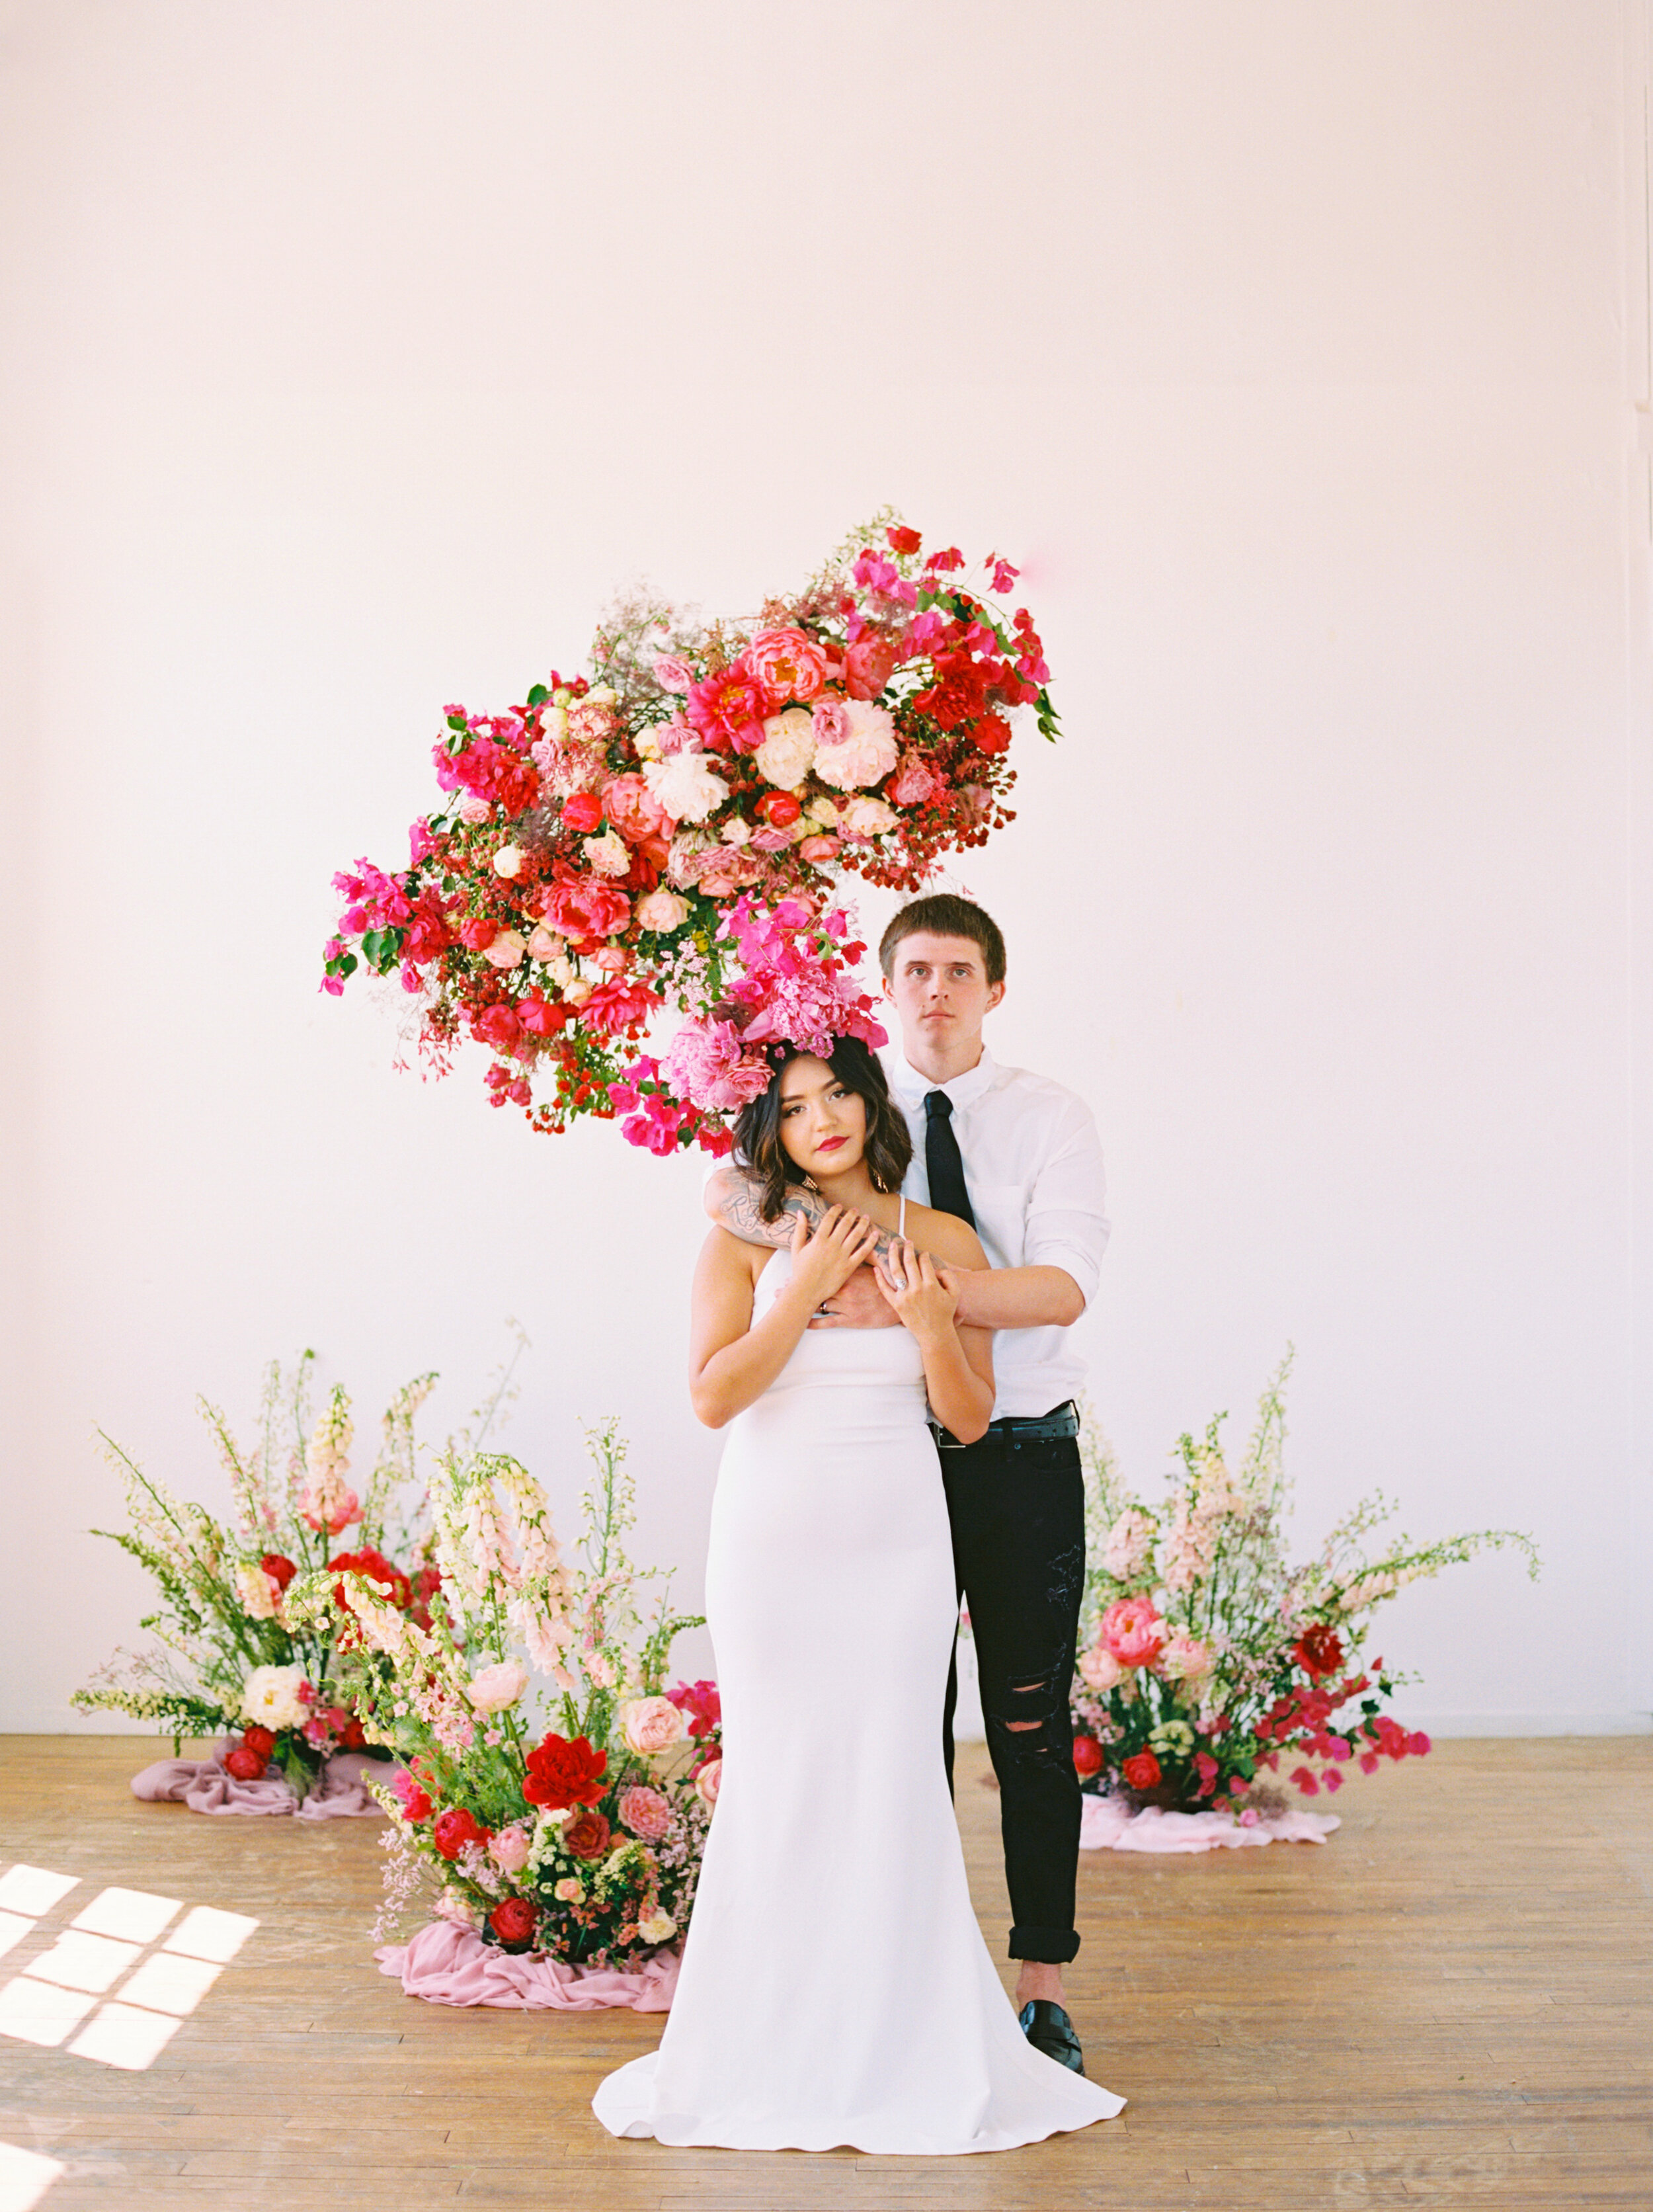 A Romantic Wedding Elopement Filled with Colorful Fuchsia - Sarahi Hadden Submission-16.jpg